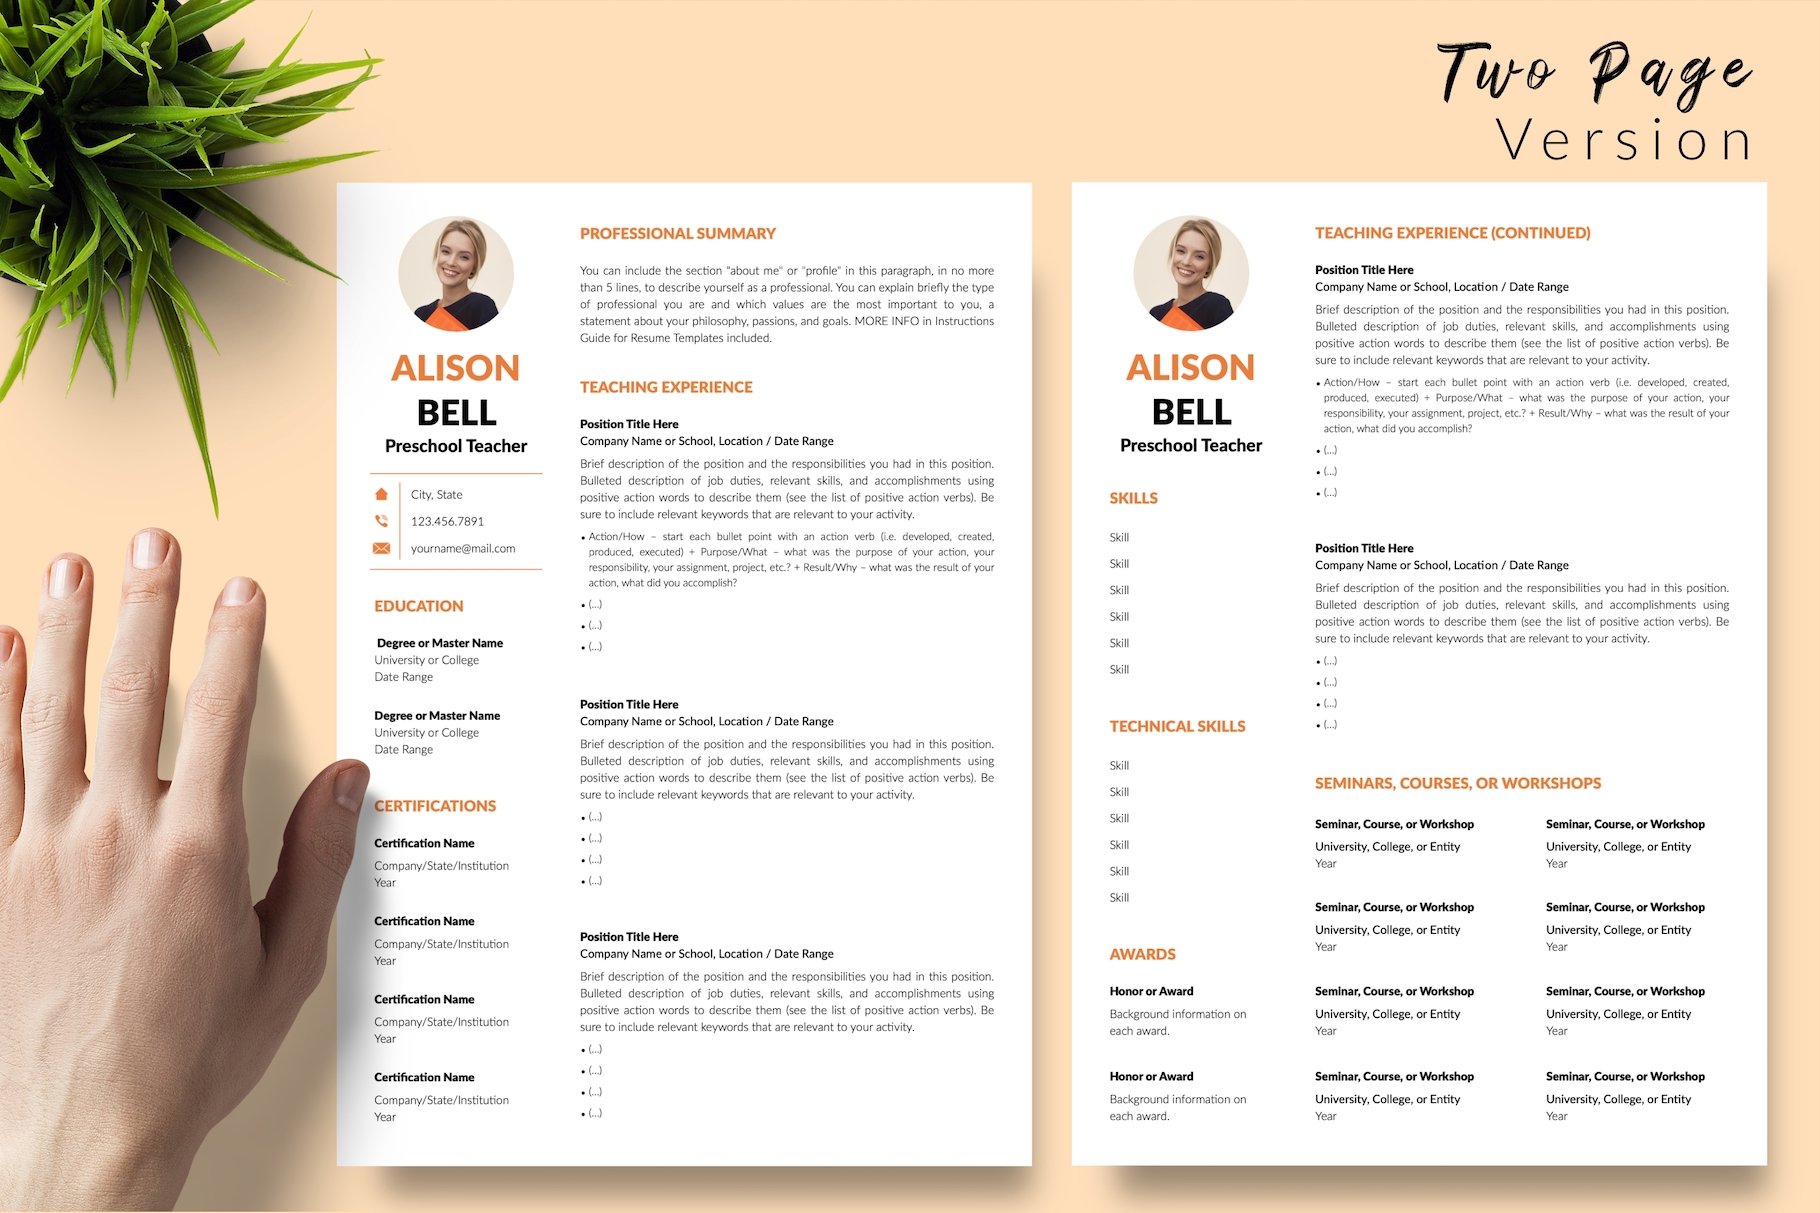 resume cv template alison bell for creative market 03 two page version 849